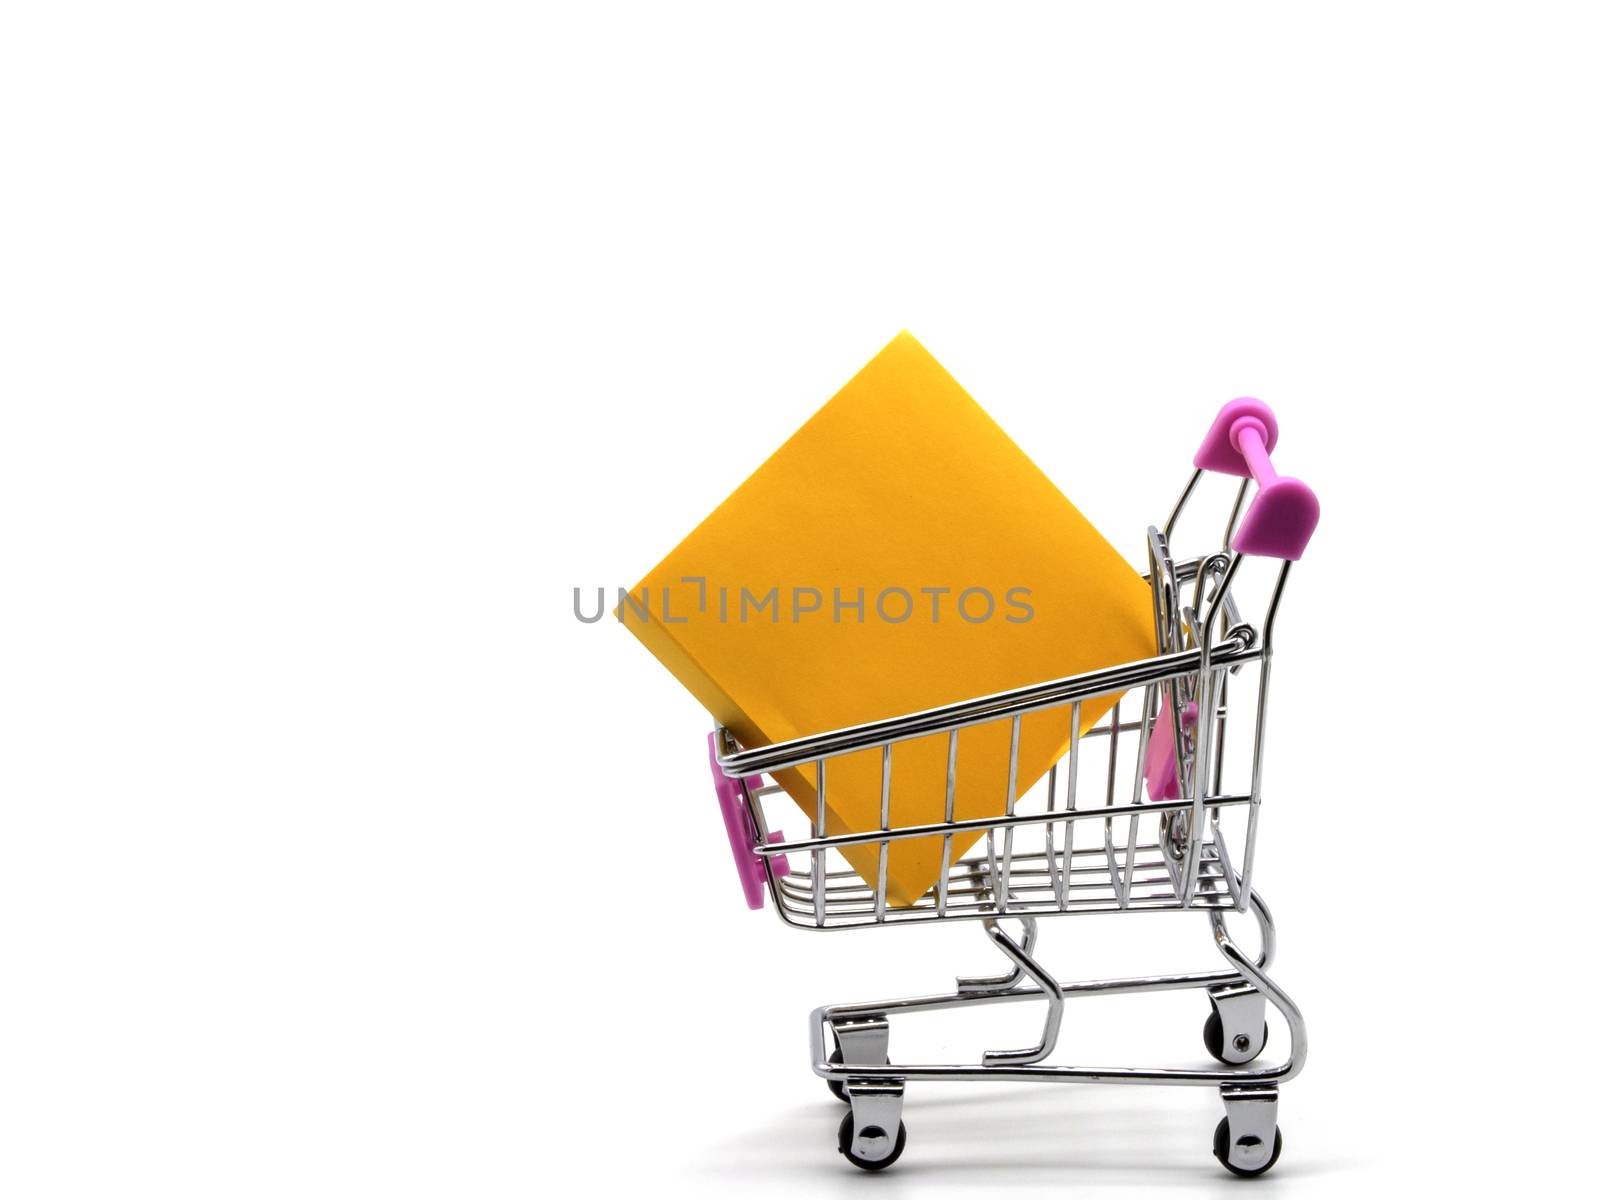 Sticky note and shopping cart isolated and white background.